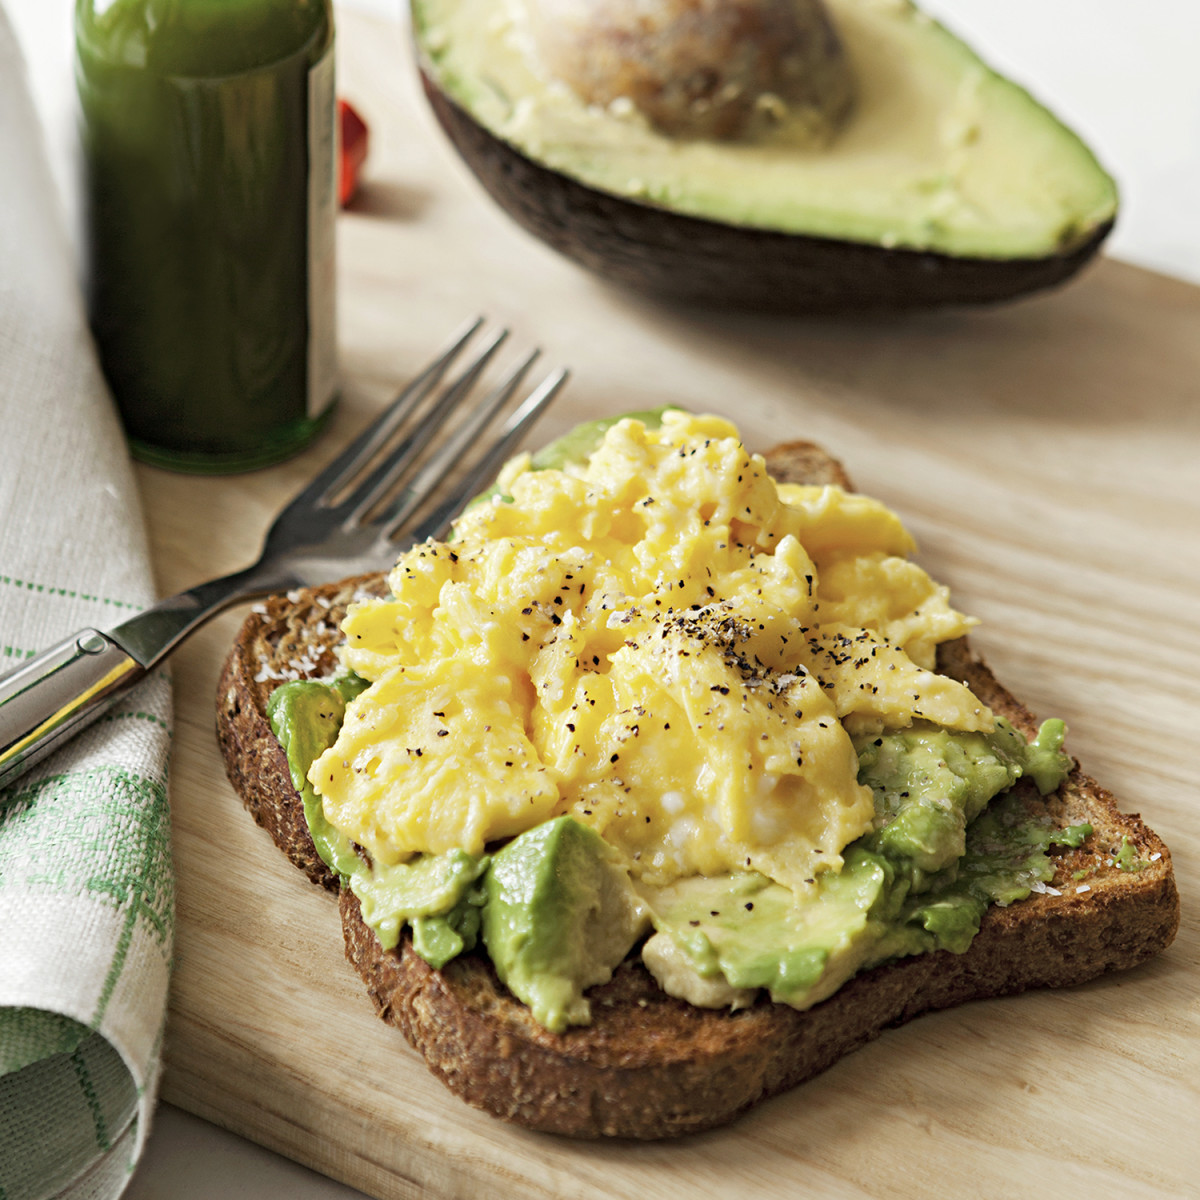 Toasted Rye Bread with Avocado and Eggs Recipe